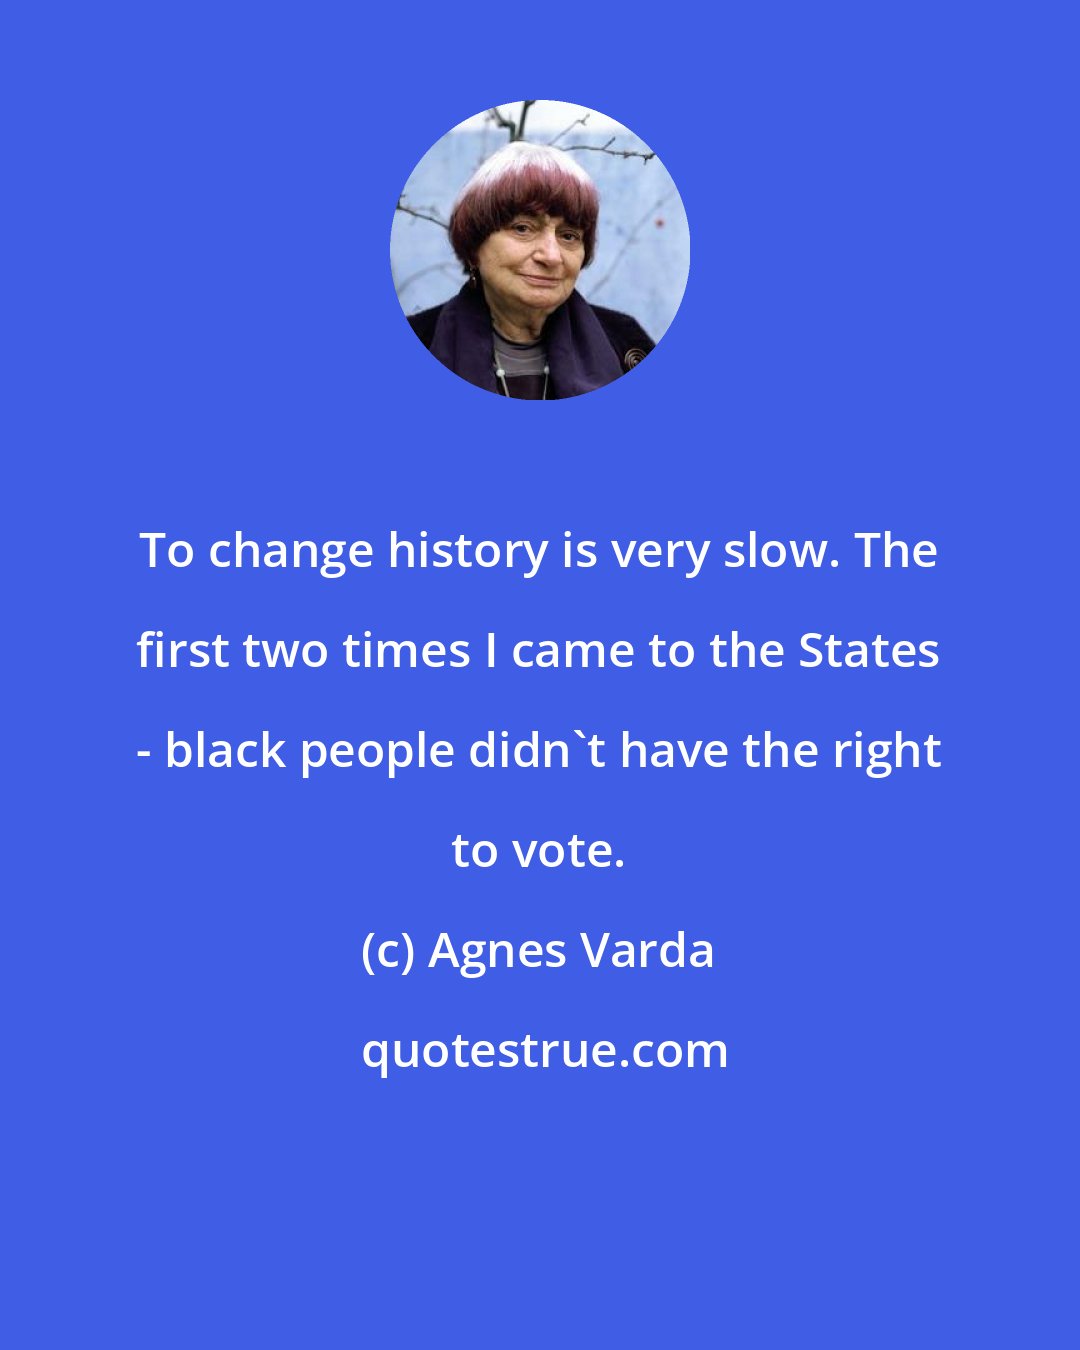 Agnes Varda: To change history is very slow. The first two times I came to the States - black people didn't have the right to vote.